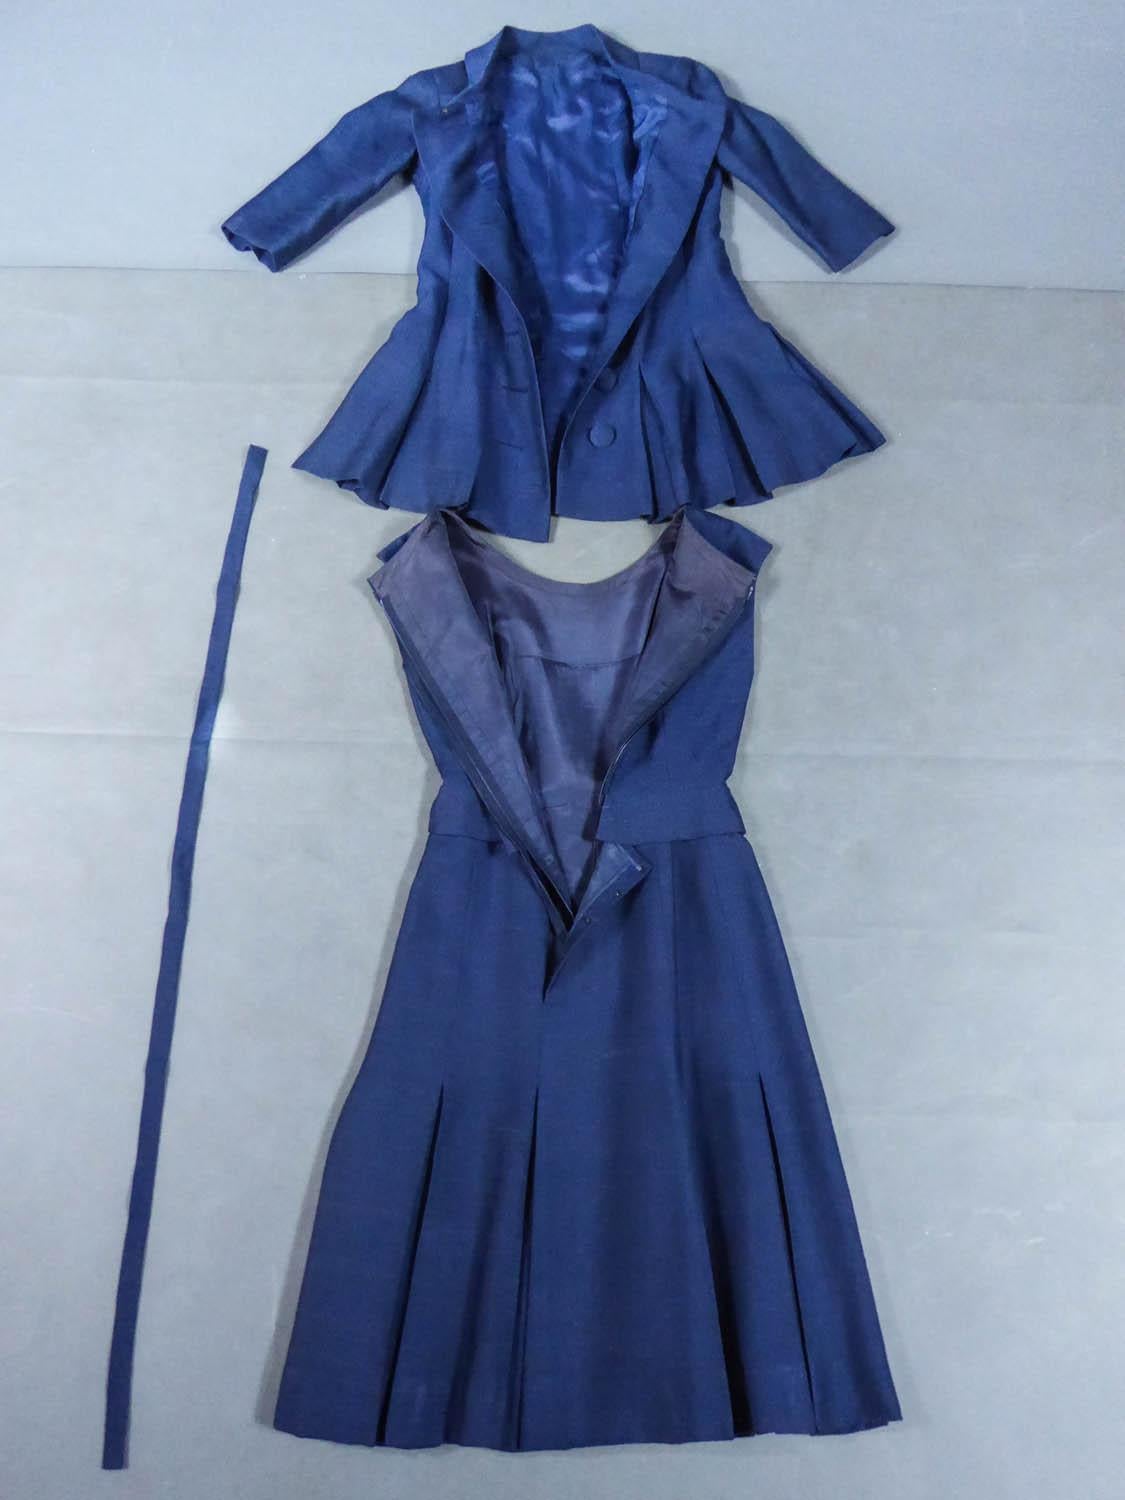 Circa 1956
France

Set of day dress and jacket Jacques Heim in navy blue wool around 1956. Very close to the flared line A of Christian Dior, superposition of the box folds of the jacket on the box folds of the skirt, amplifying the conical effect